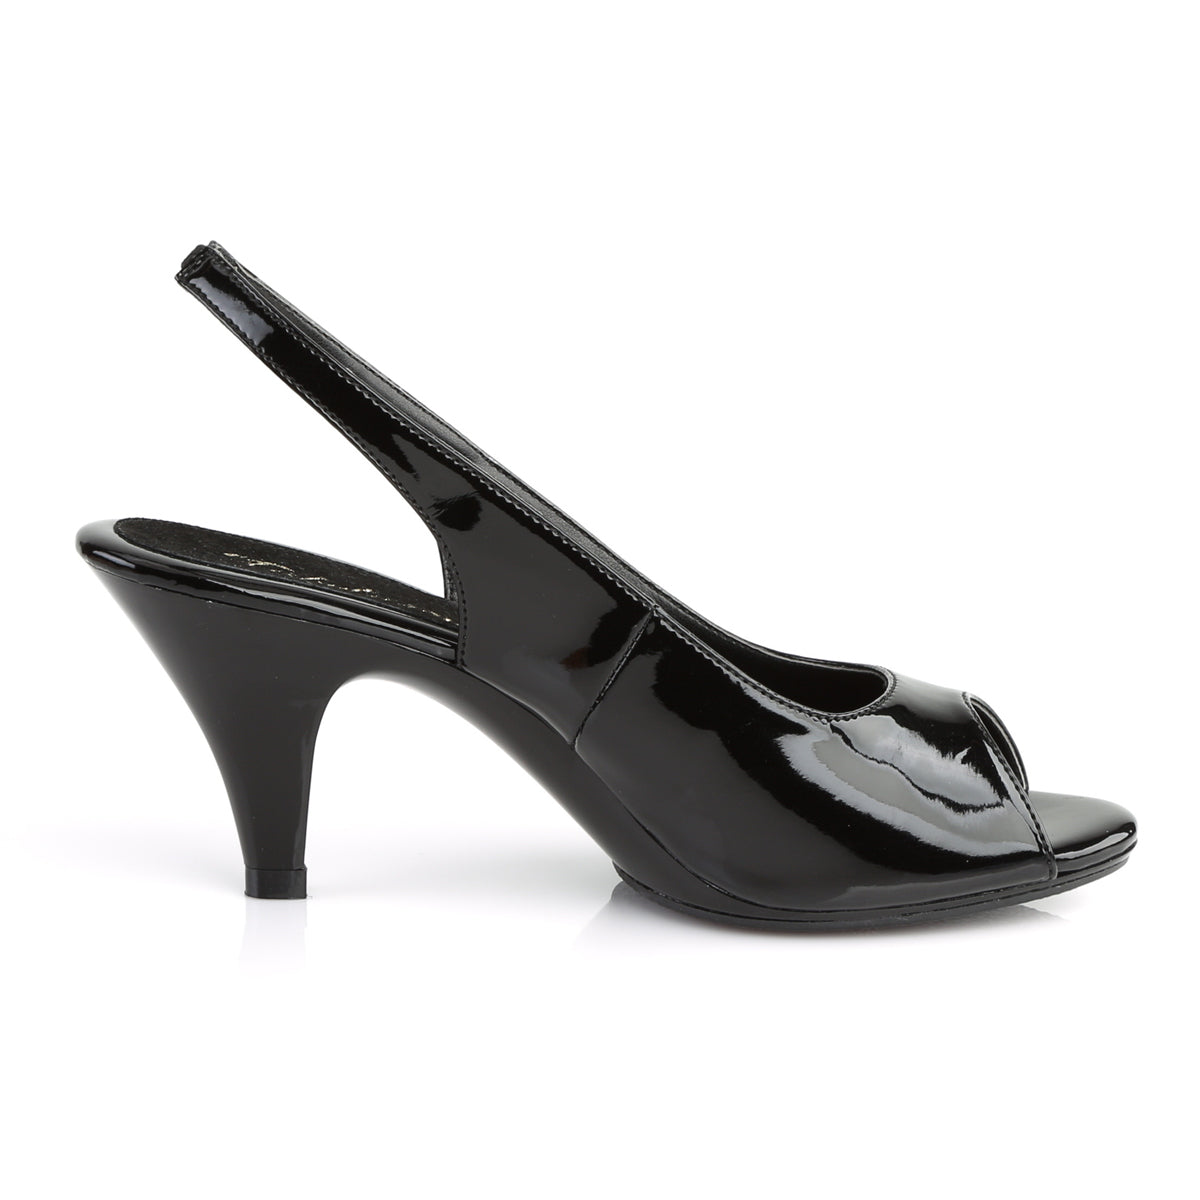 BELLE-368 Fabulicious 3 Inch Heel Black Patent Sexy Shoes-Fabulicious- Sexy Shoes Fetish Heels